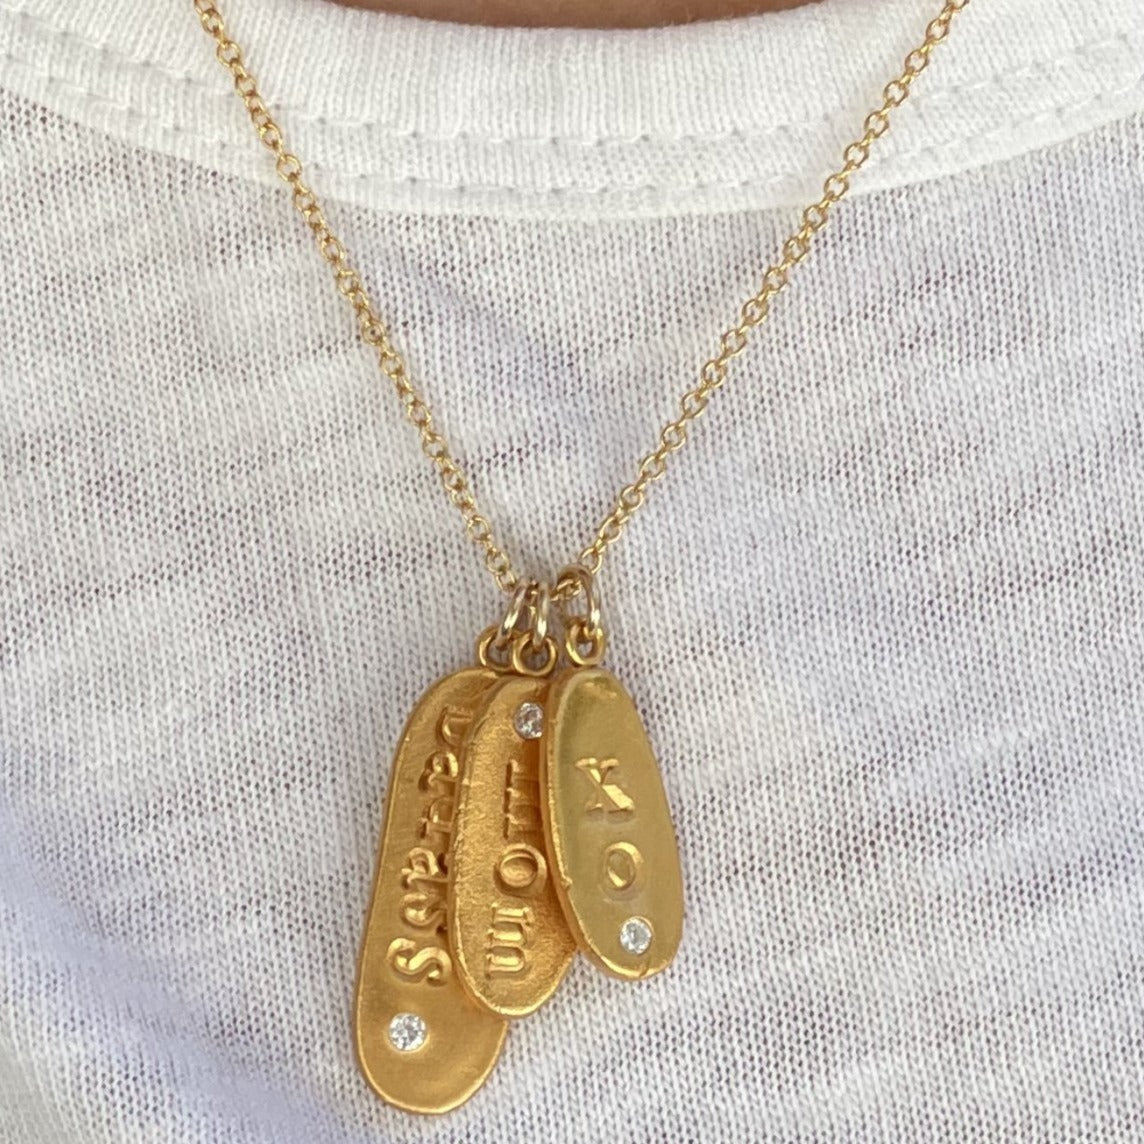 XO (Hugs and Kisses) Tablet Necklace Gold